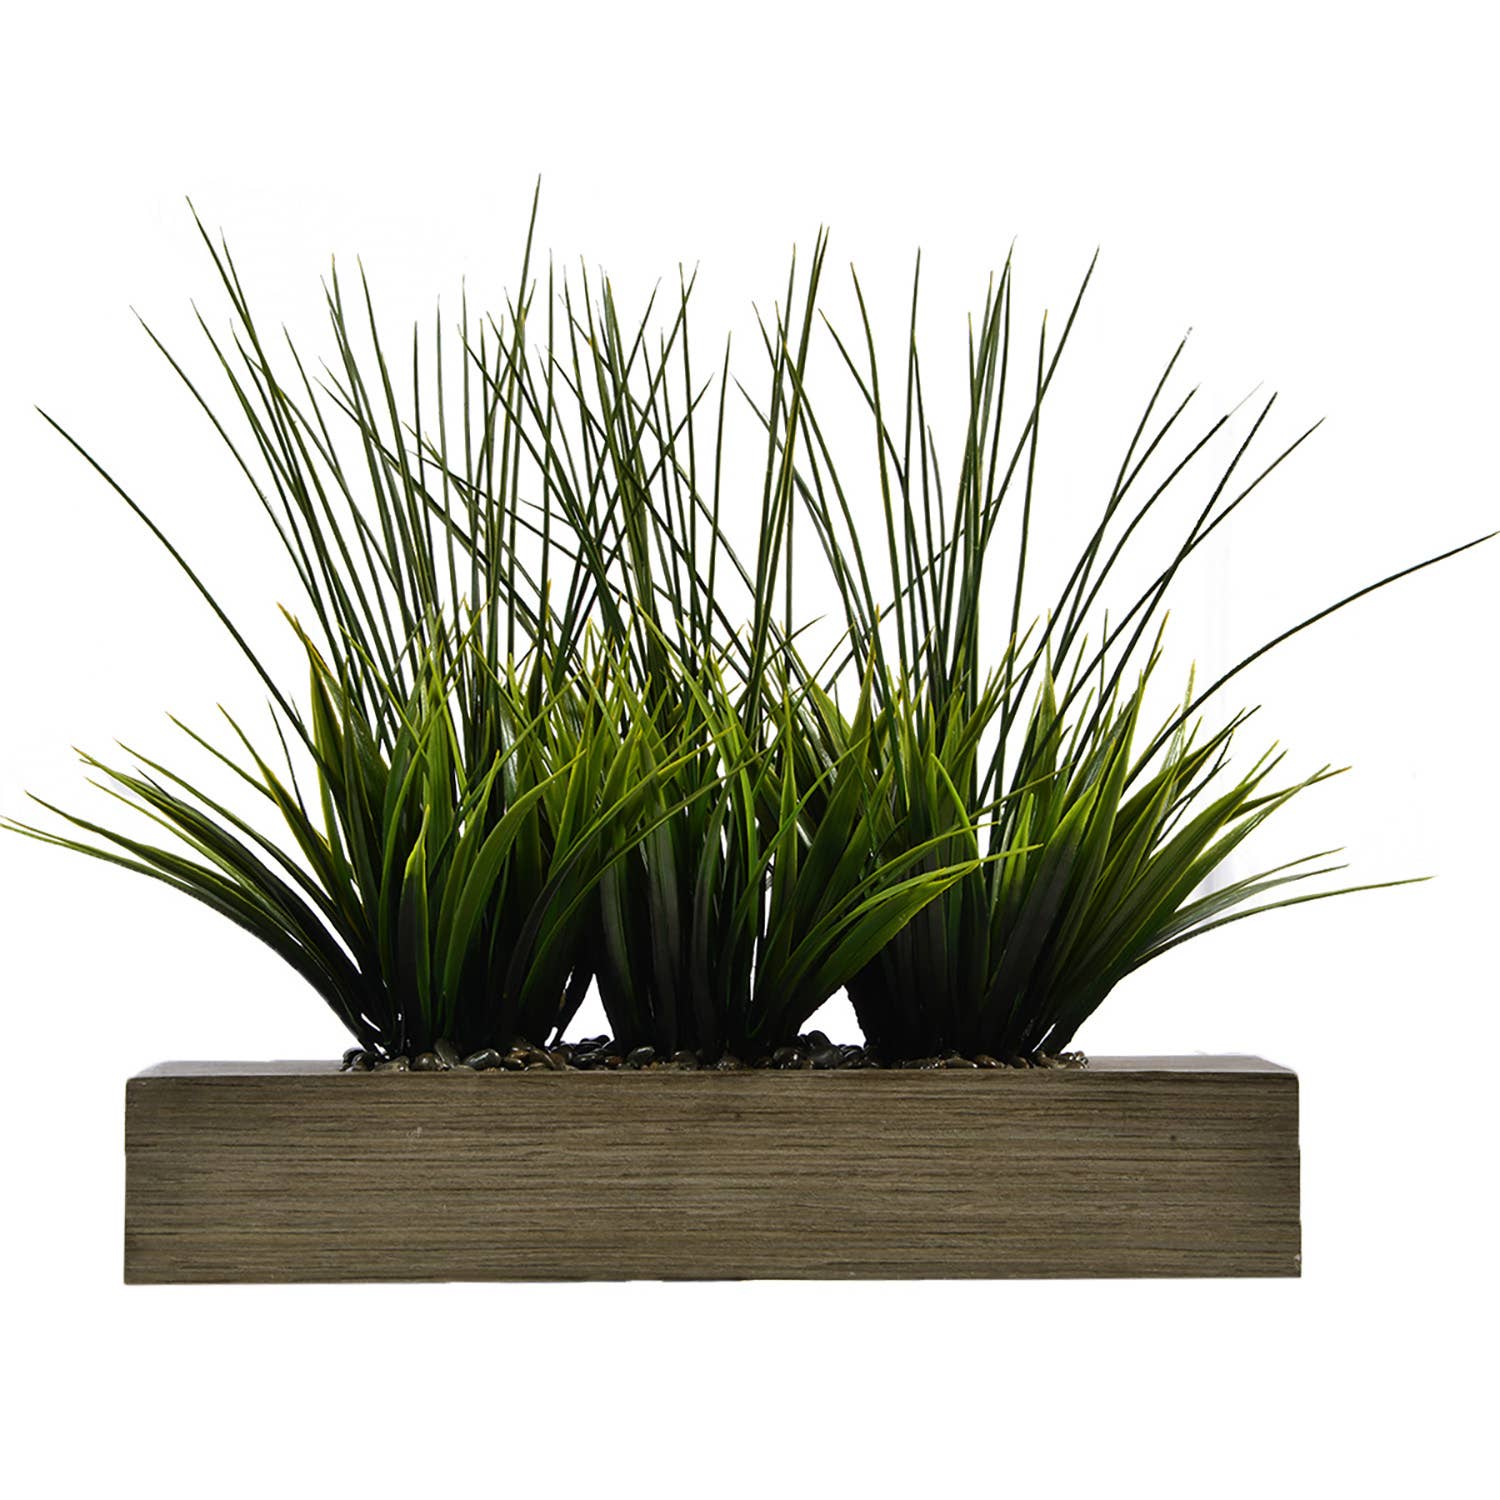 14" Tall Green Grass In Designer Taupe Holder